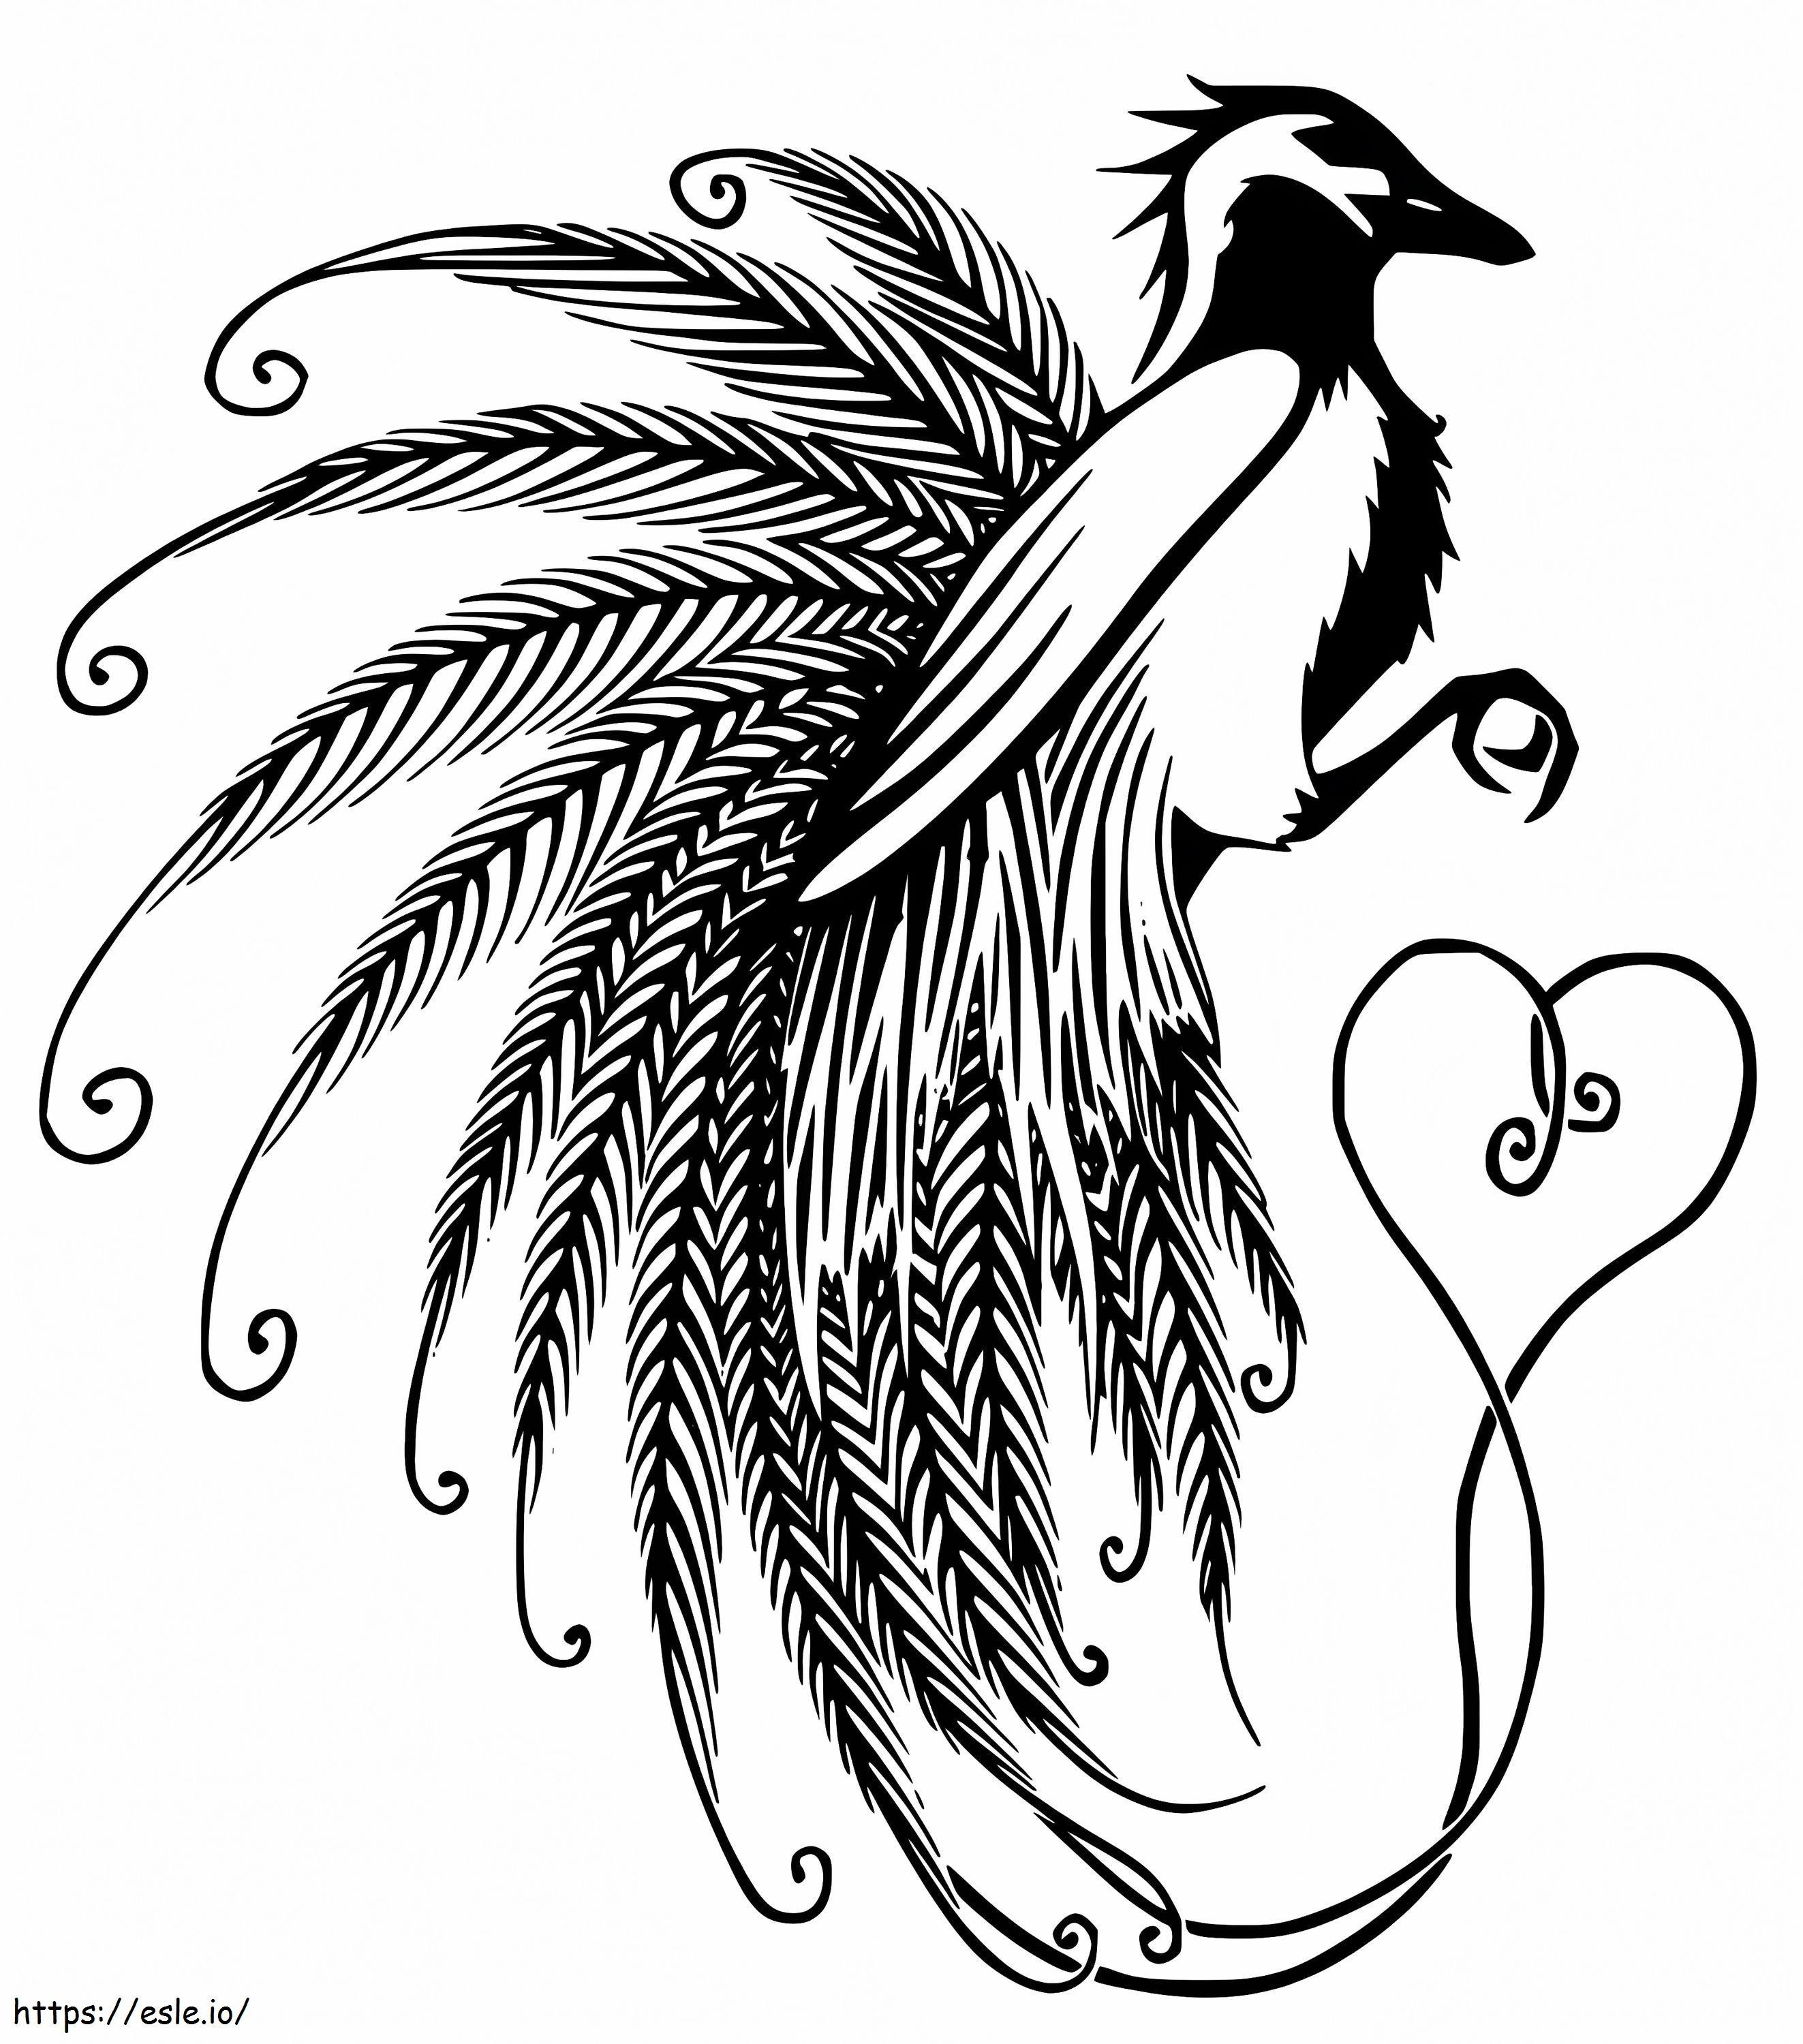 Printable Bird Of Paradise coloring page